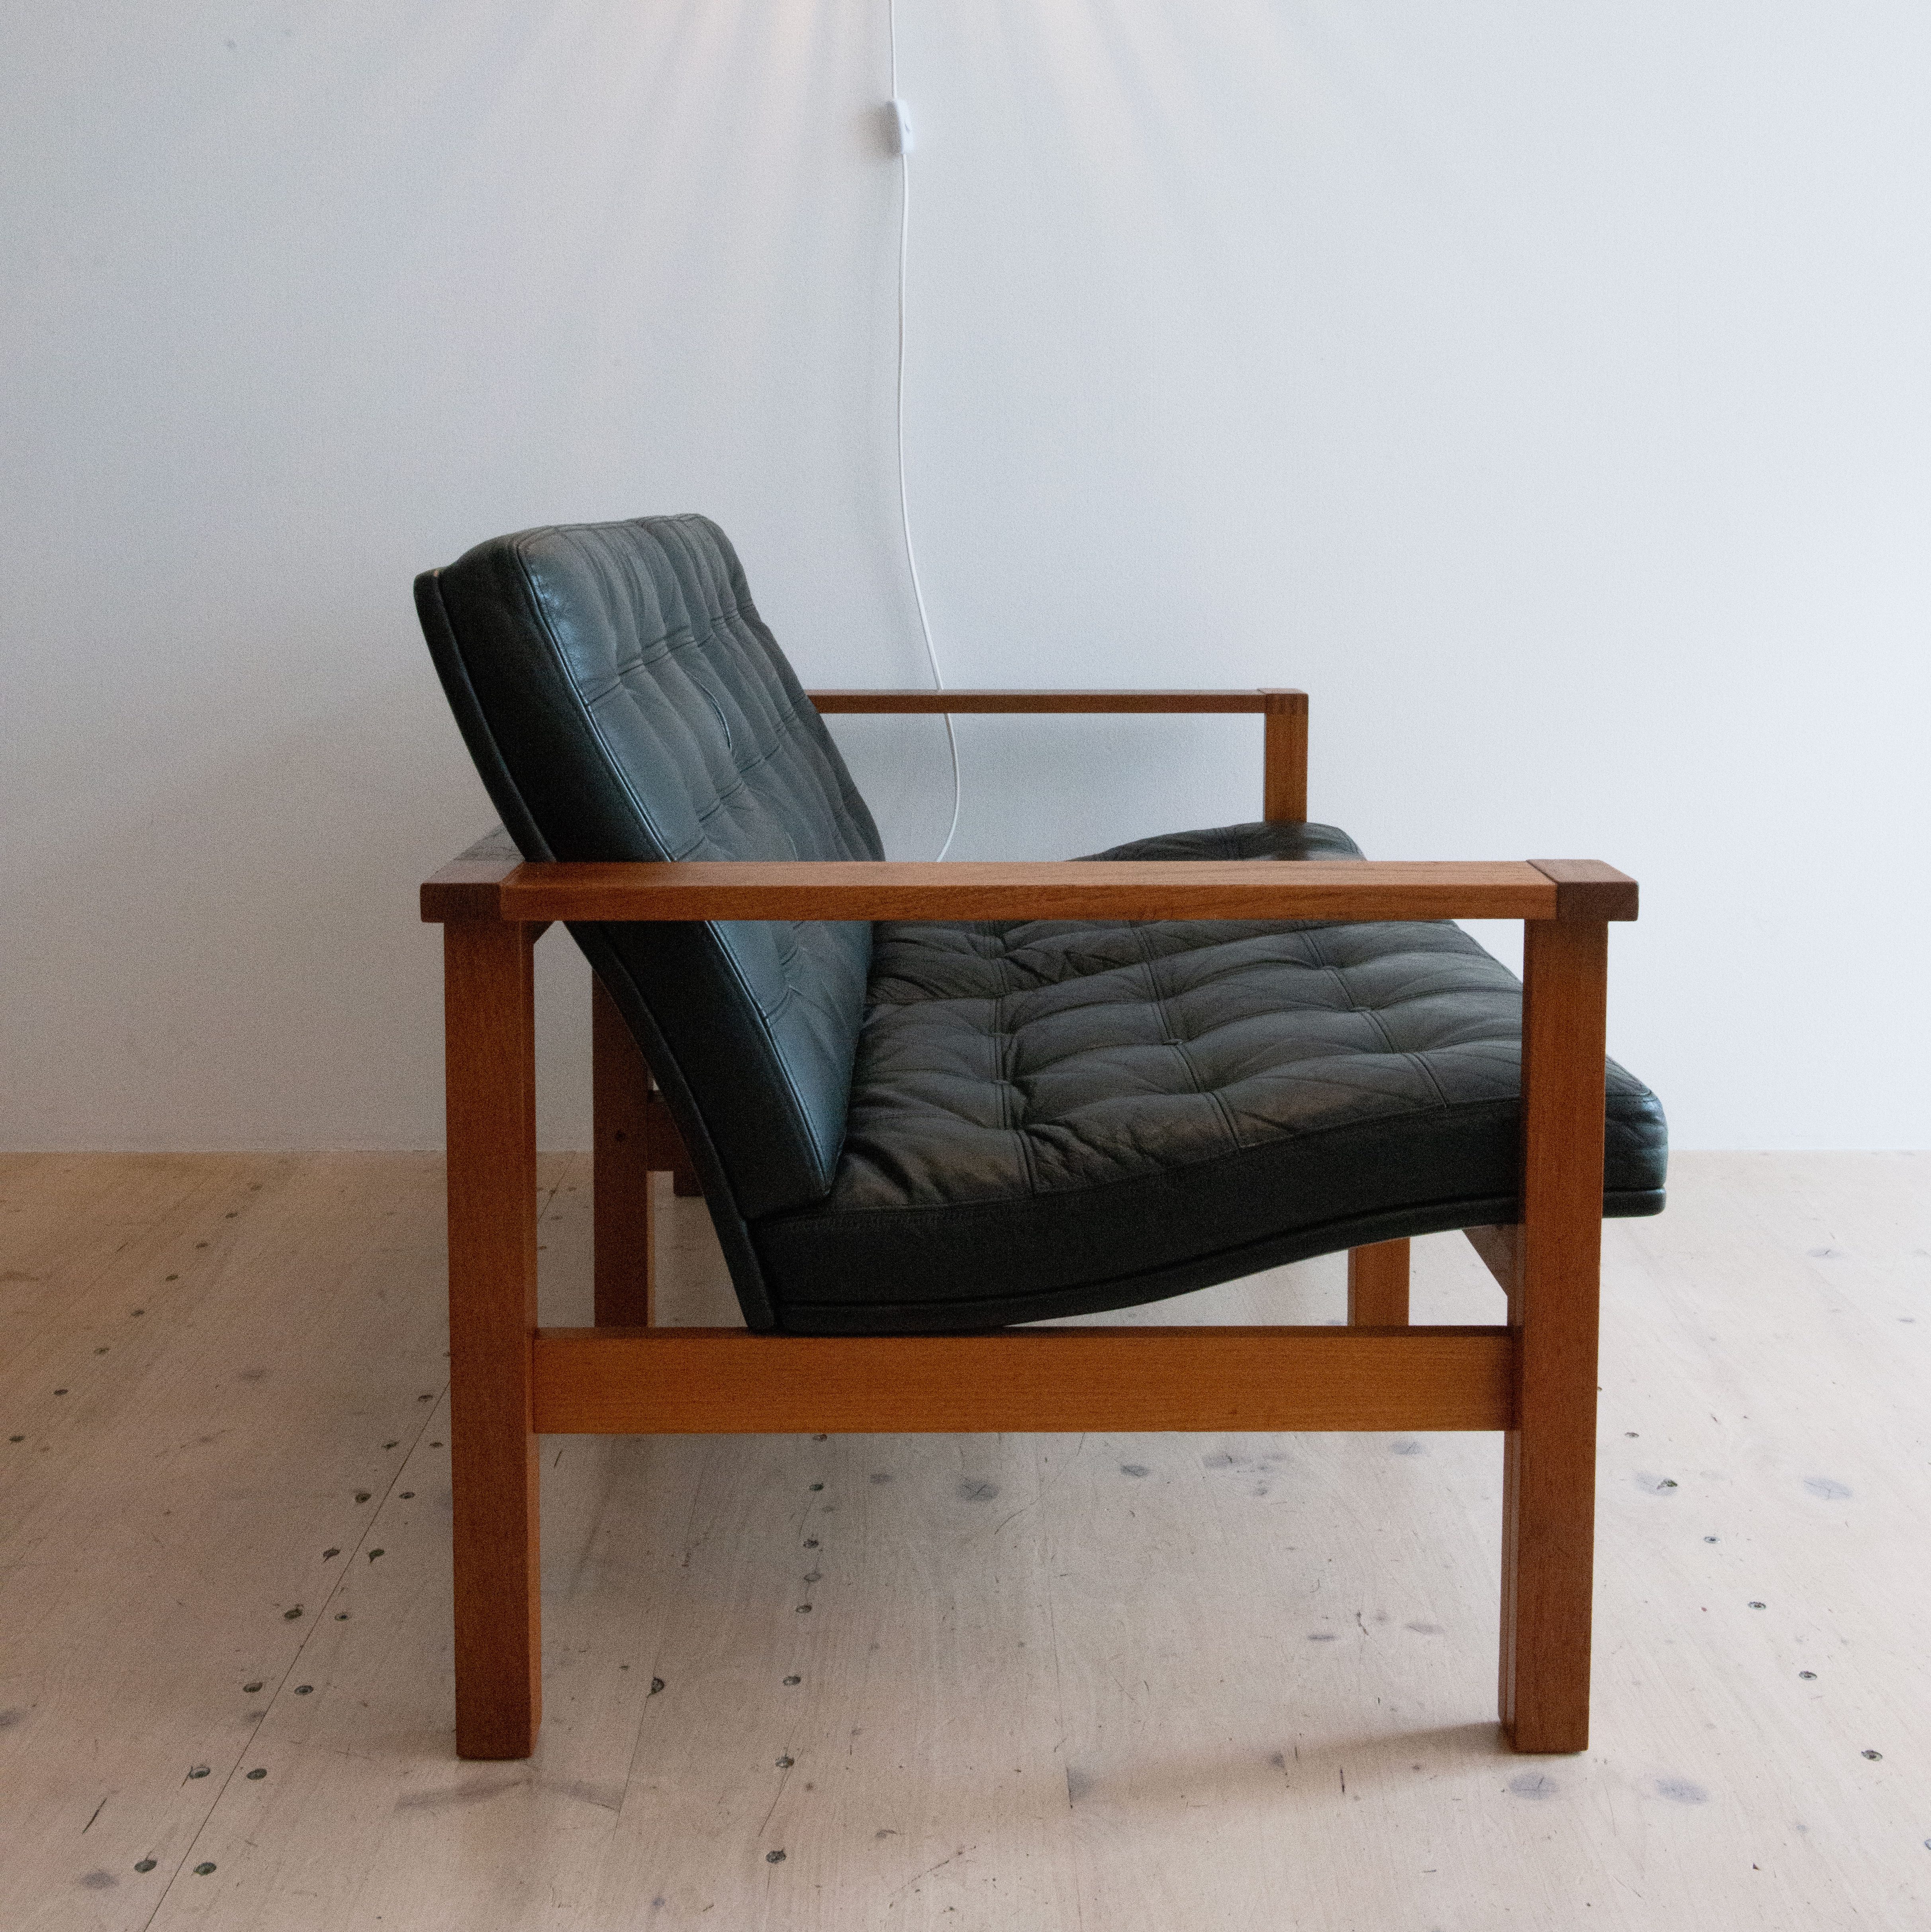 Ole Gjerlov-Knudsen & Torben Lind Two Seater in Teak and Black Leather. Produced by France and Son in Denmark in the 1960s. Available to purchase at heyday möbel, Grubenstrasse 19, 8045 Zürich, Switzerland.